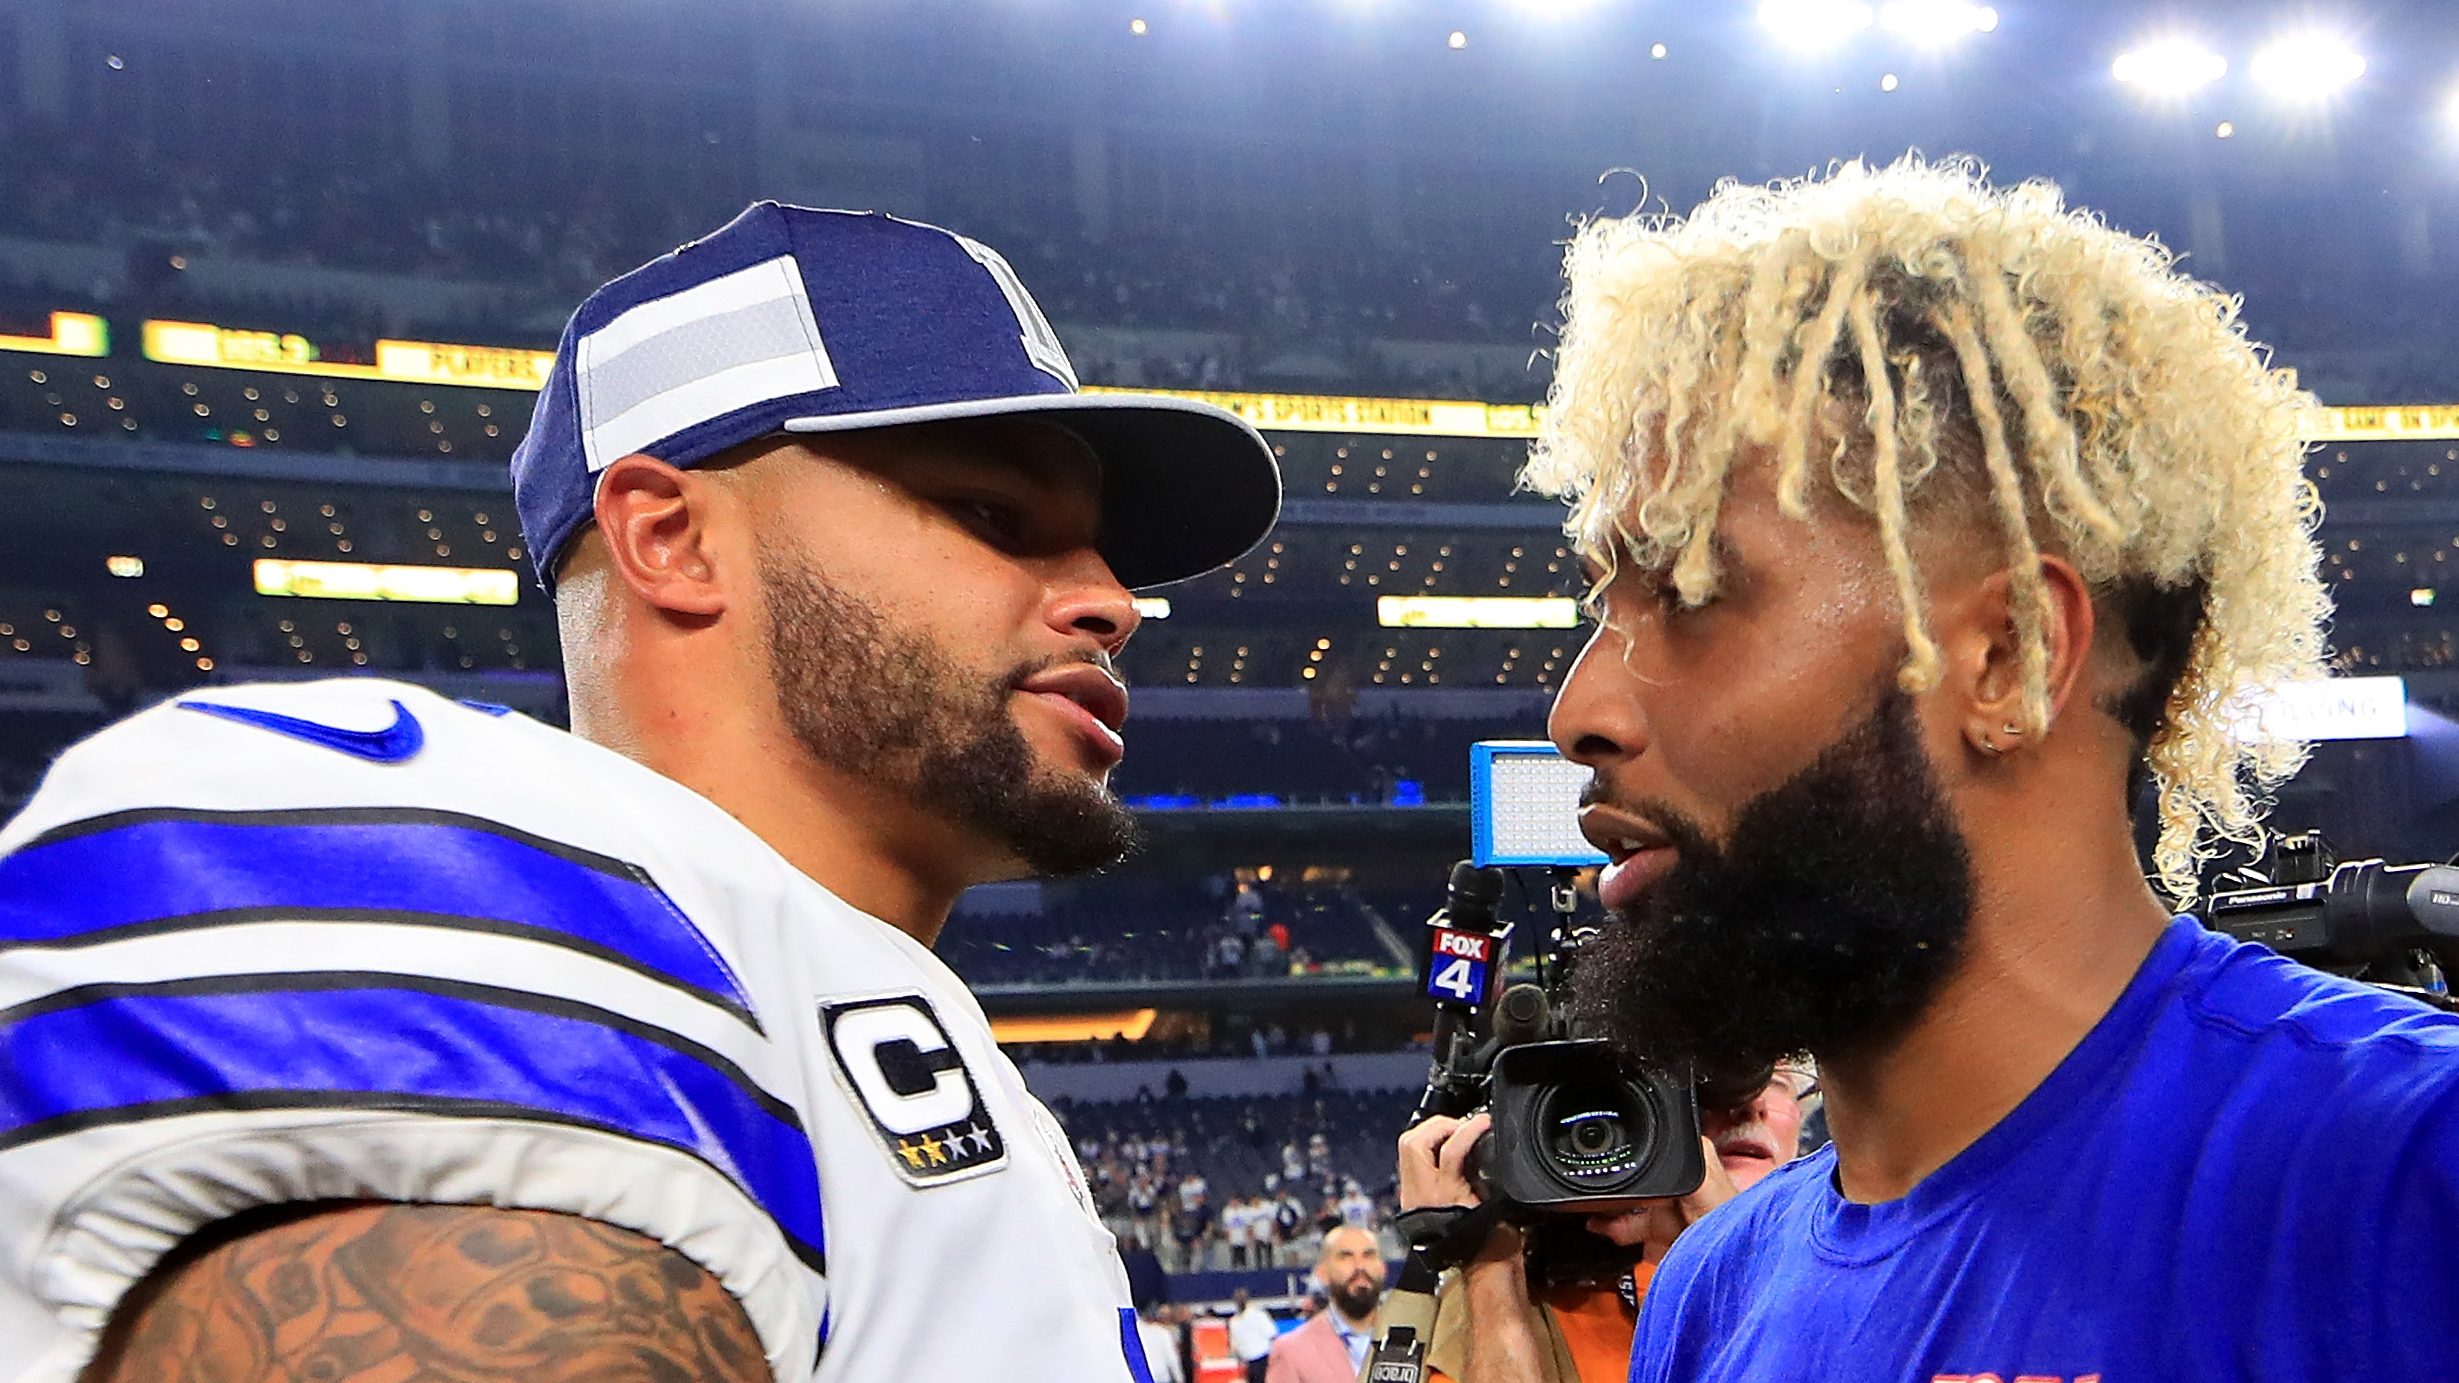 NFL executive adds fuel to Odell Beckham Jr Cowboys rumors